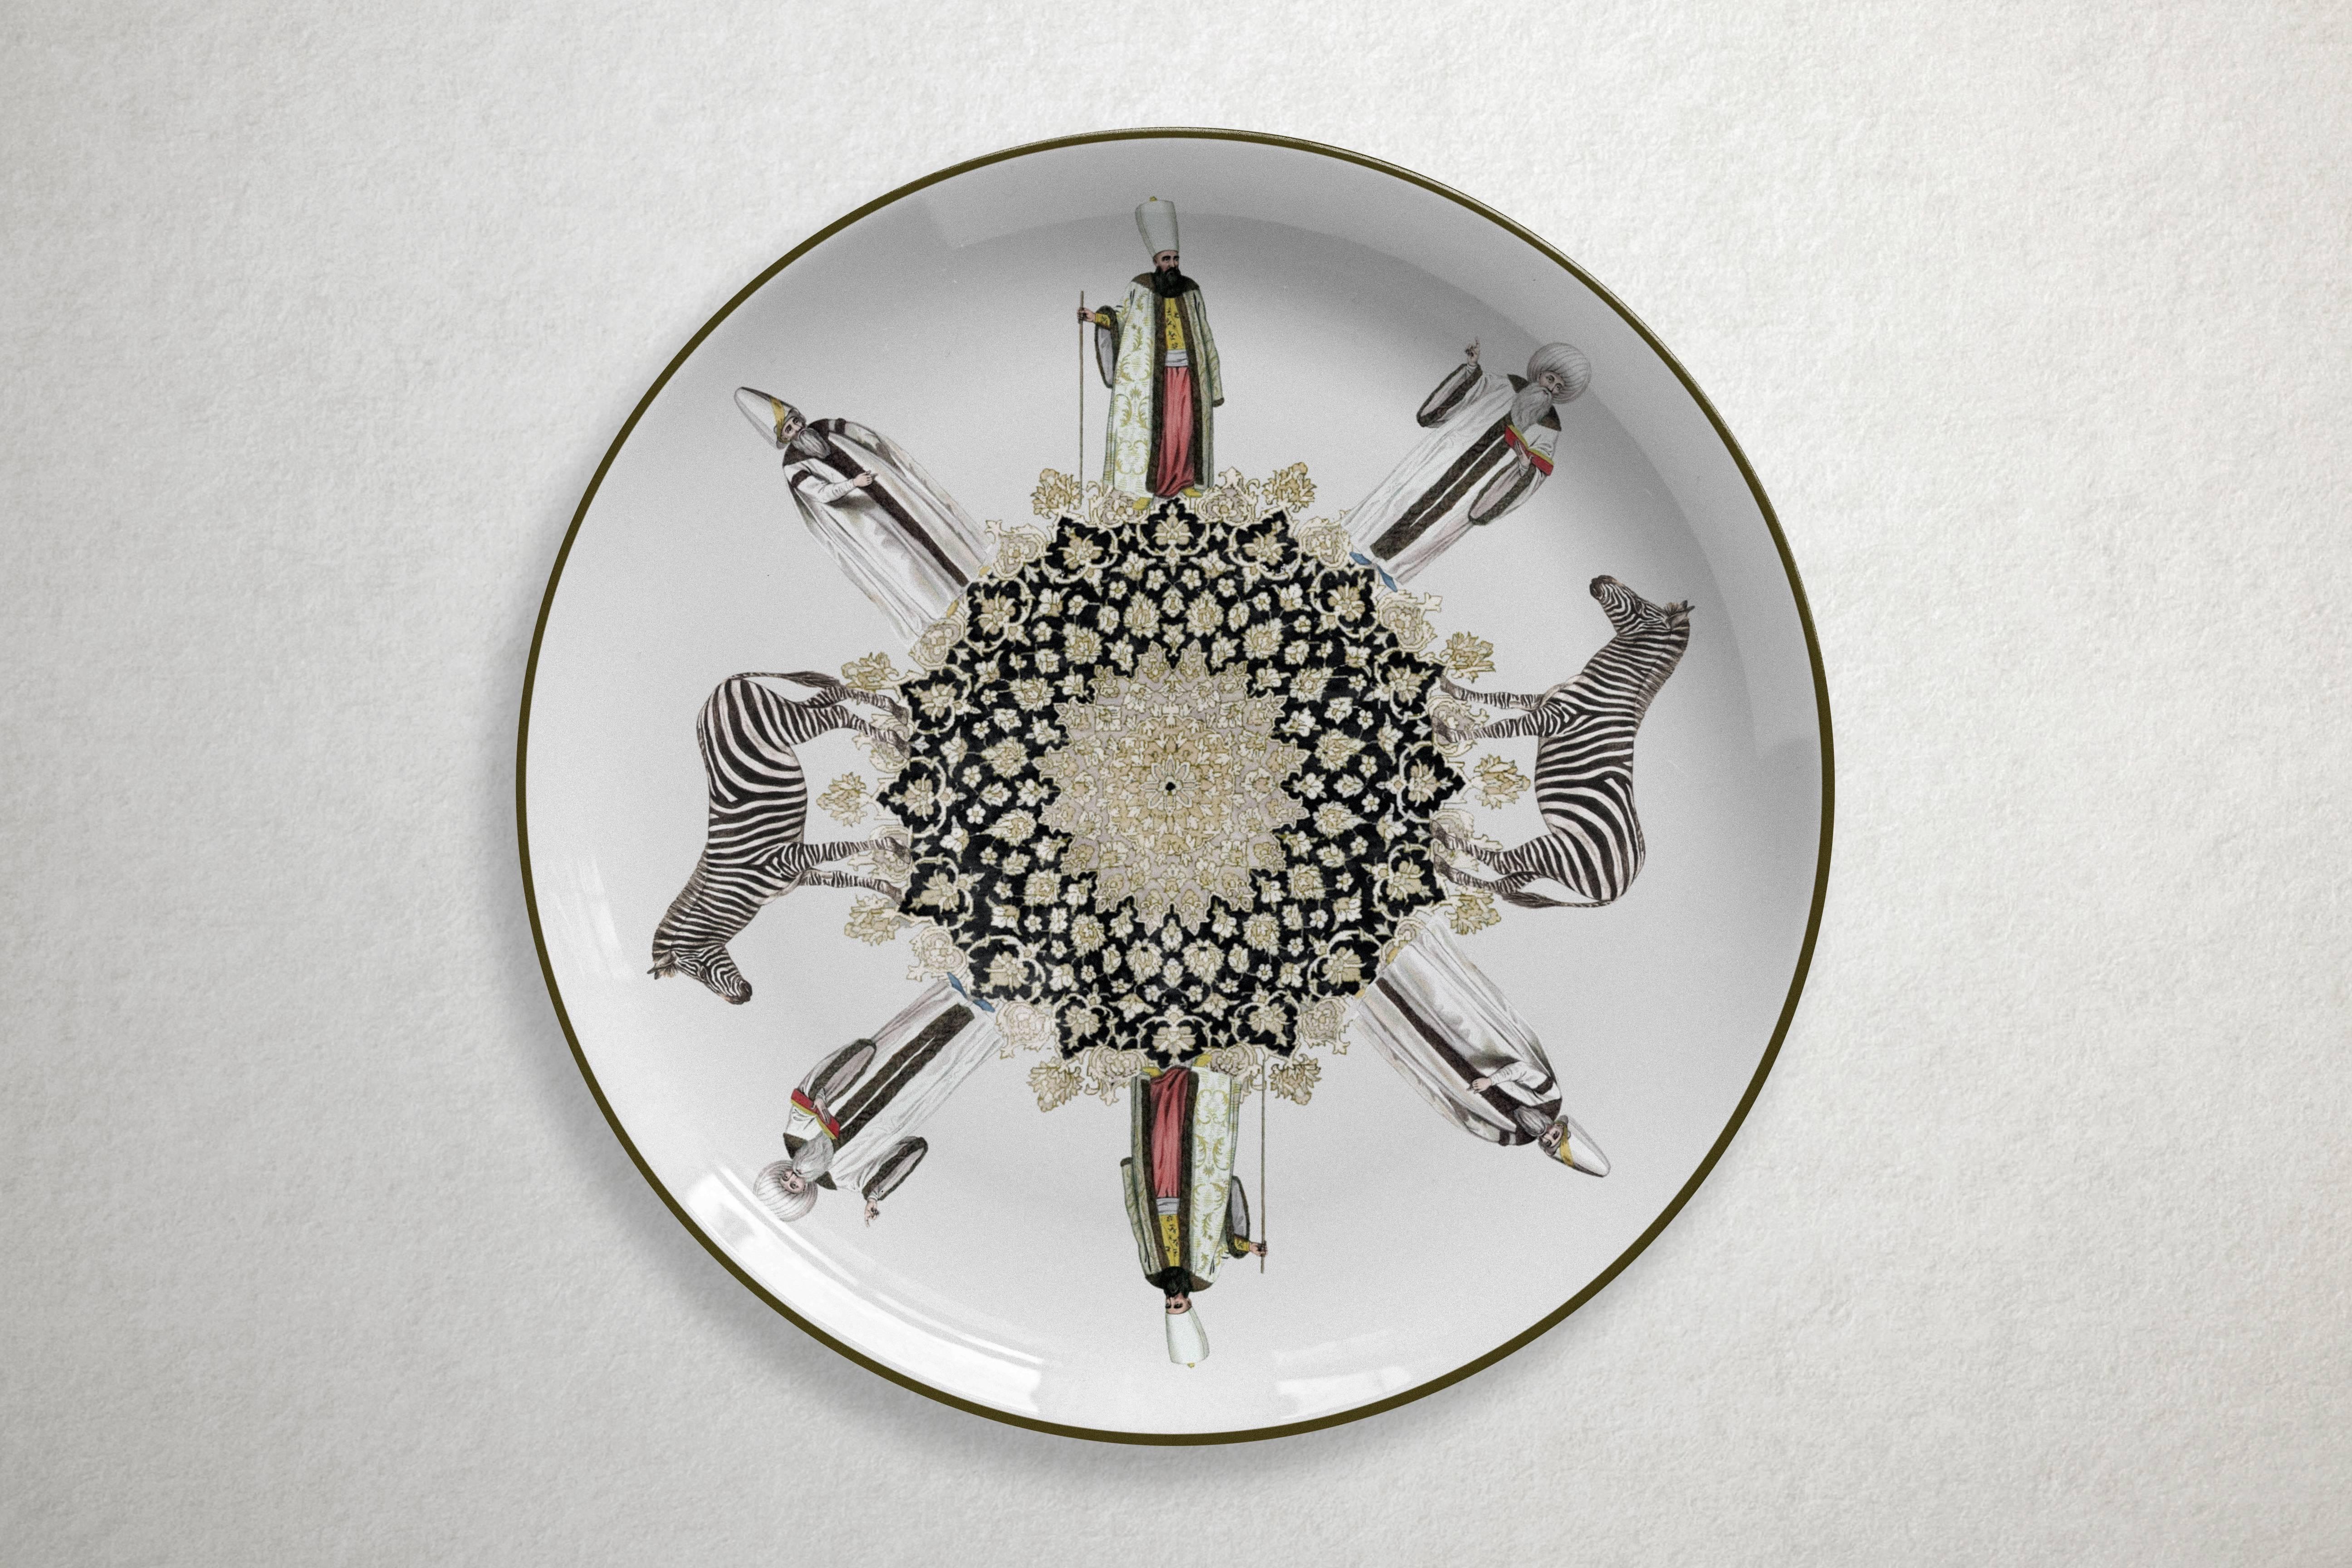 Beautiful set of six porcelain dinner plates by Vito Nesta for Les Ottomans will make an elegant statement with sophisticated Art de la table for every occasion.

Handmade in Italy

Upon request available in a set of 12, 18 or 24 plates.